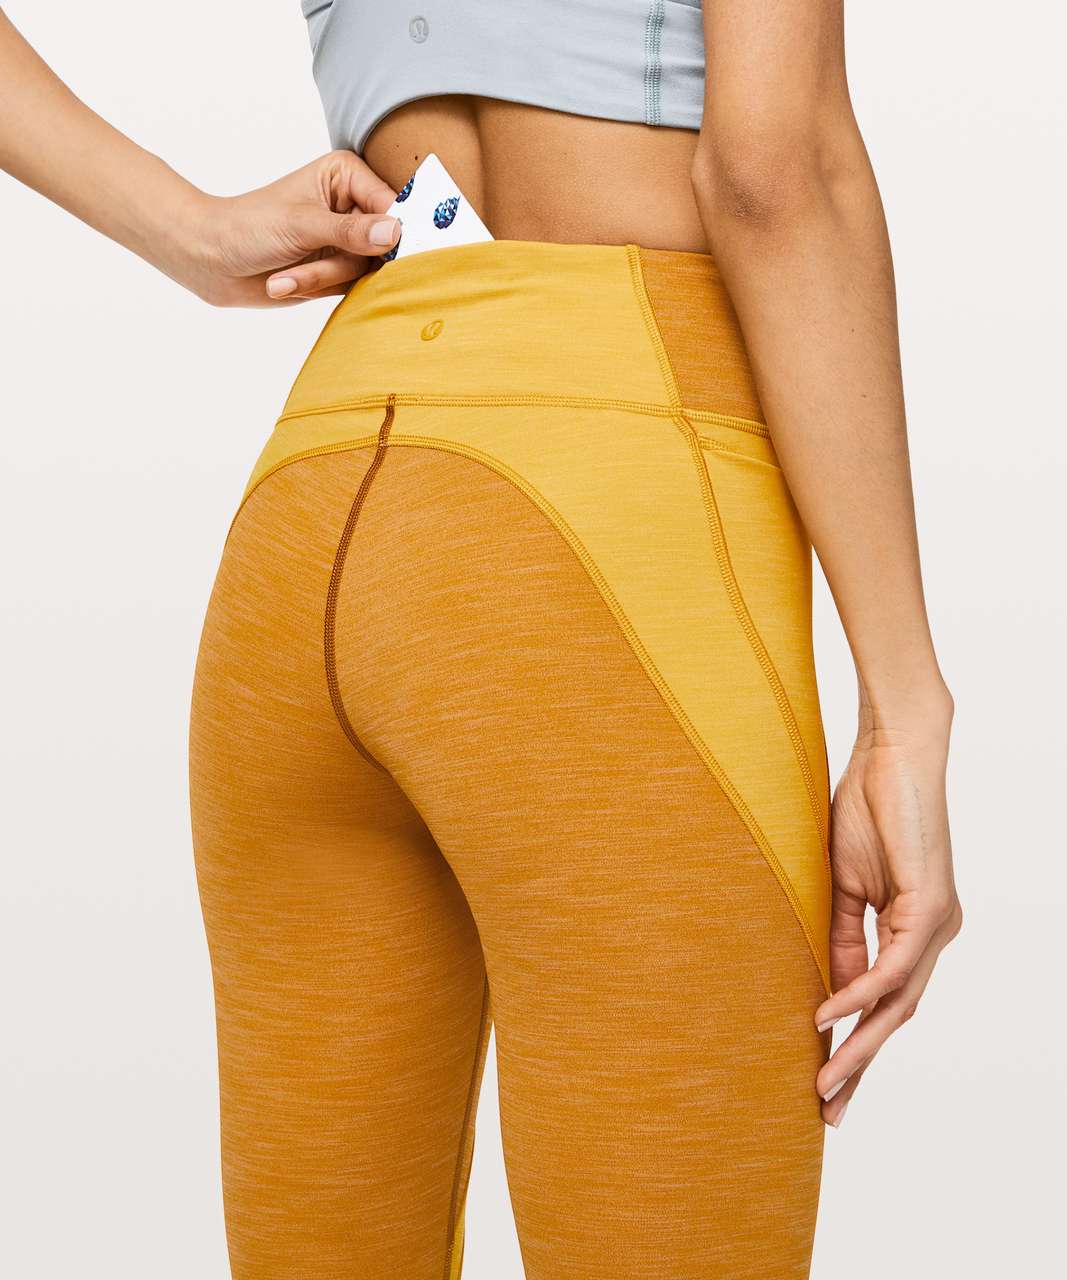 Lululemon Early Extension HighRise Tight *28" Heathered Fools Gold